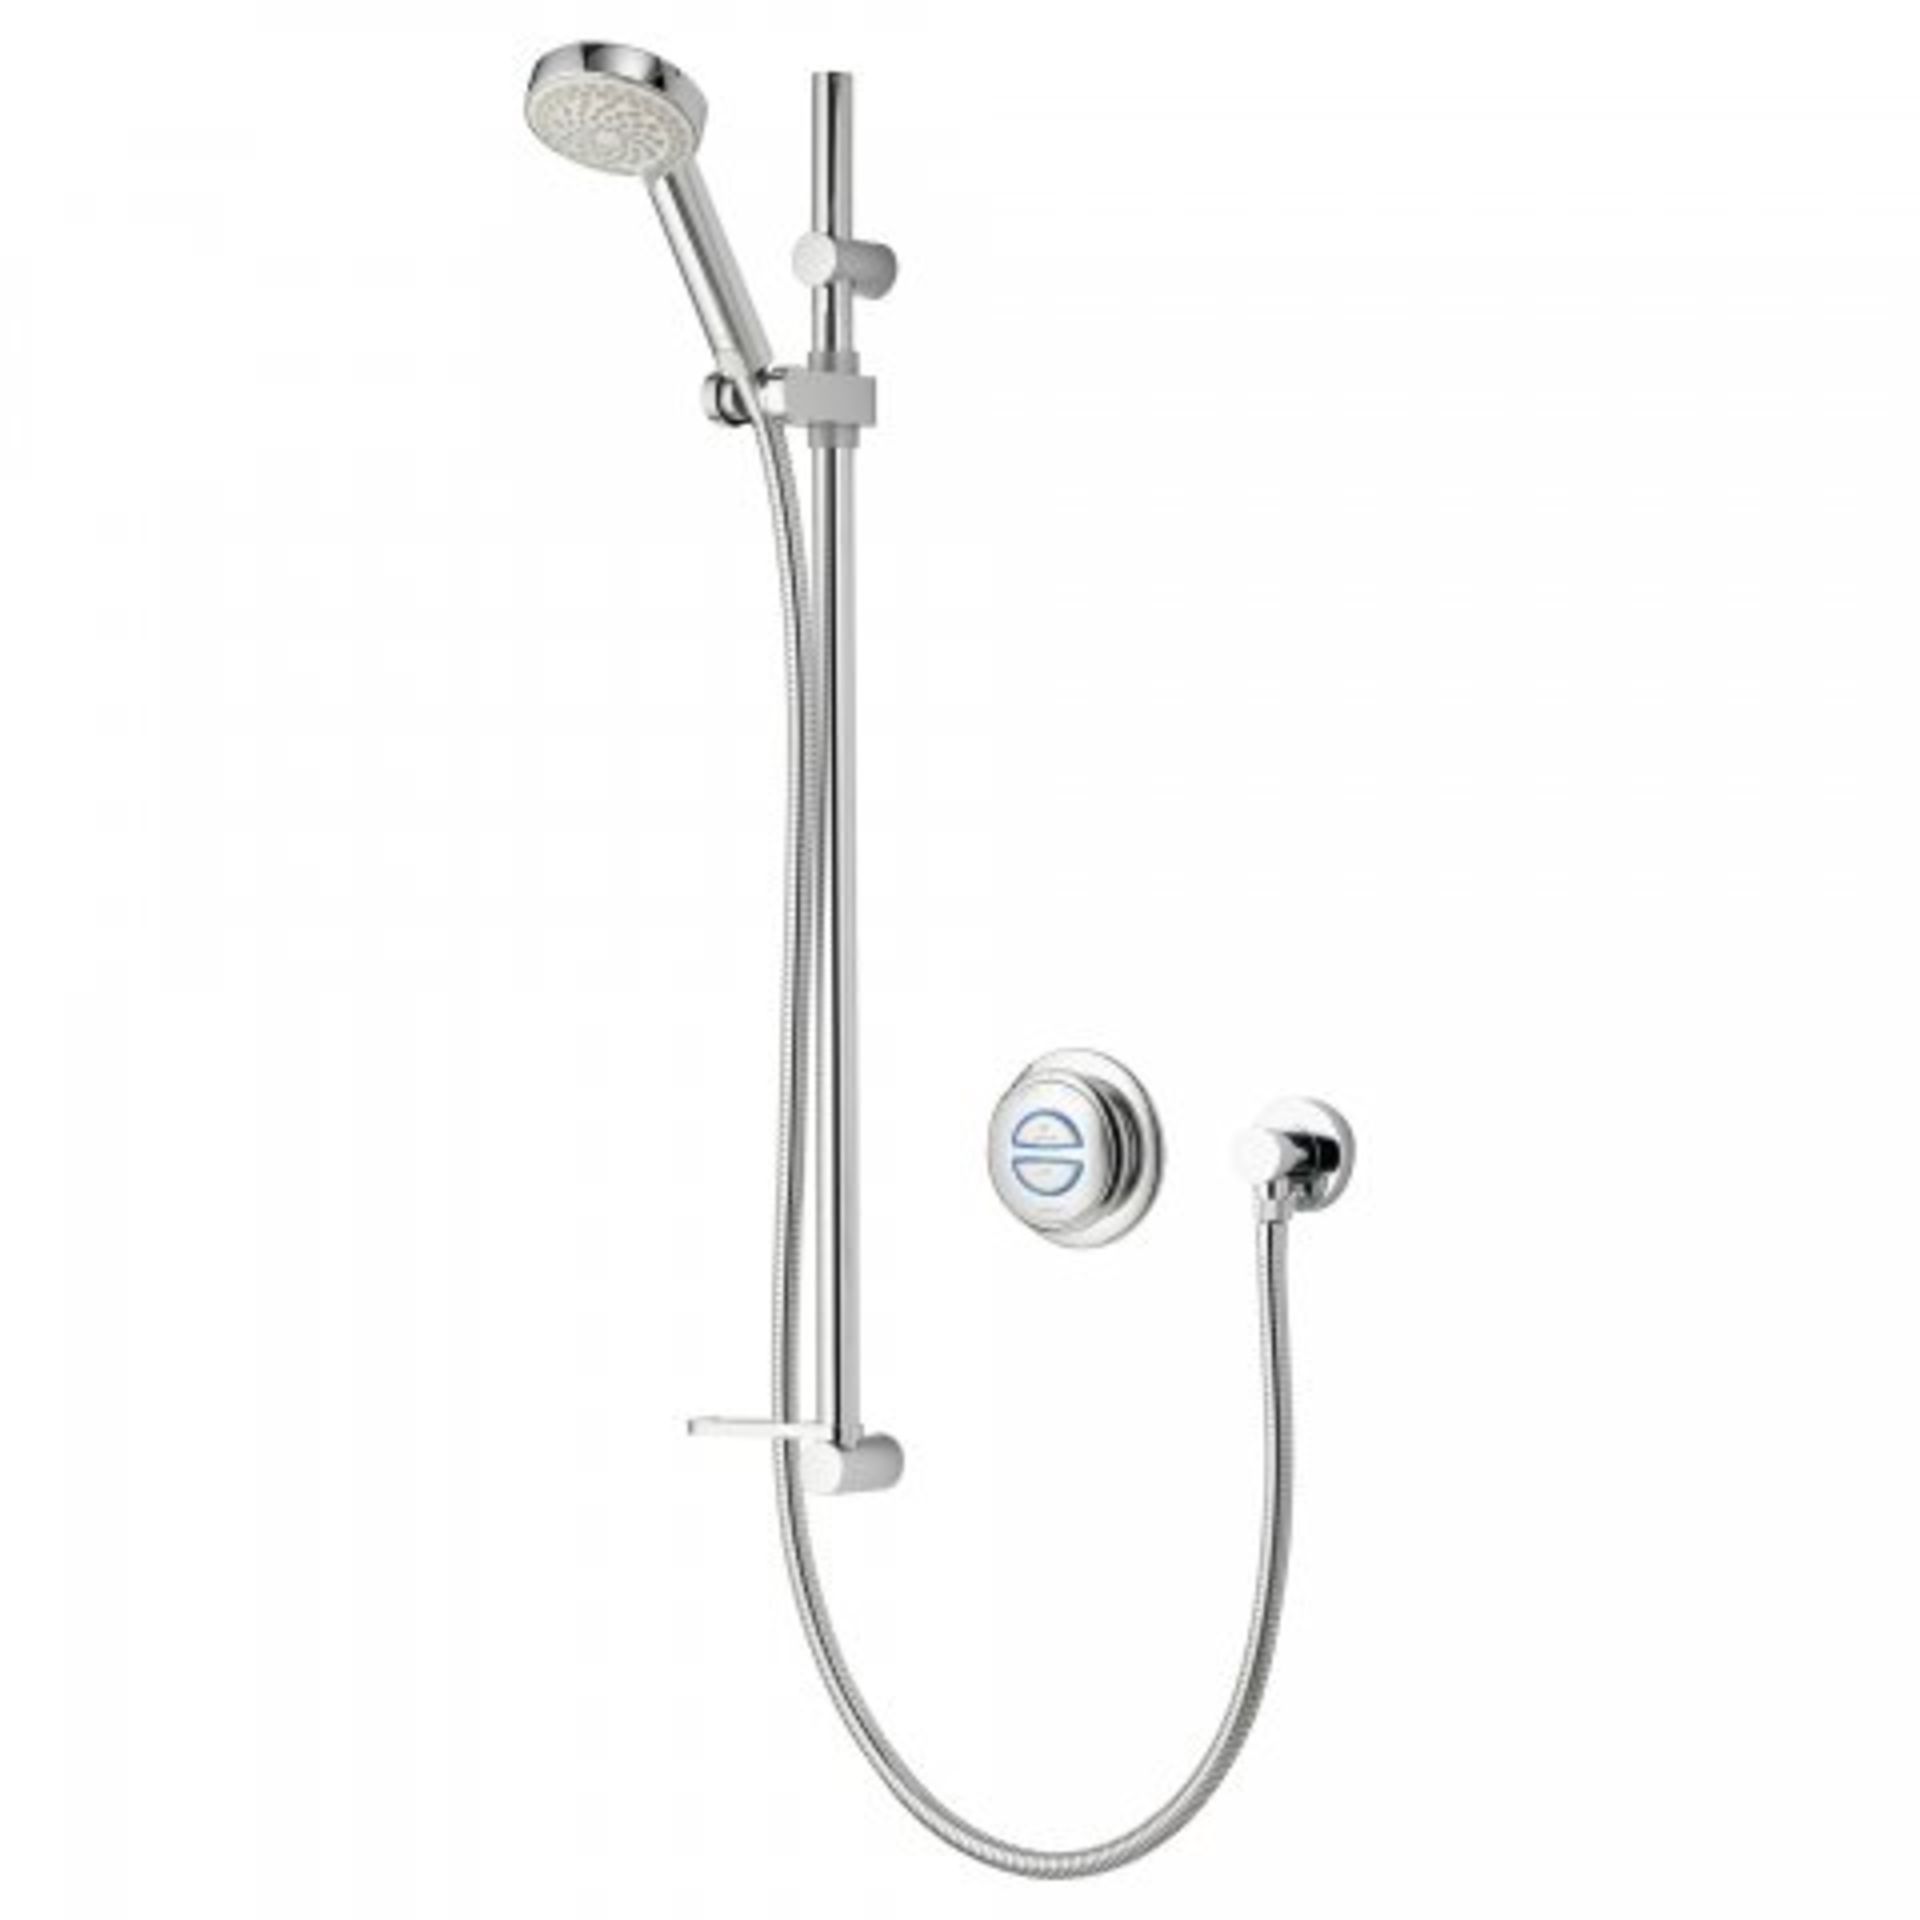 (AA12) Aqualisa Quartz Digital™ Concealed Shower - Pumped. RRP £999.99. Get the convenience and